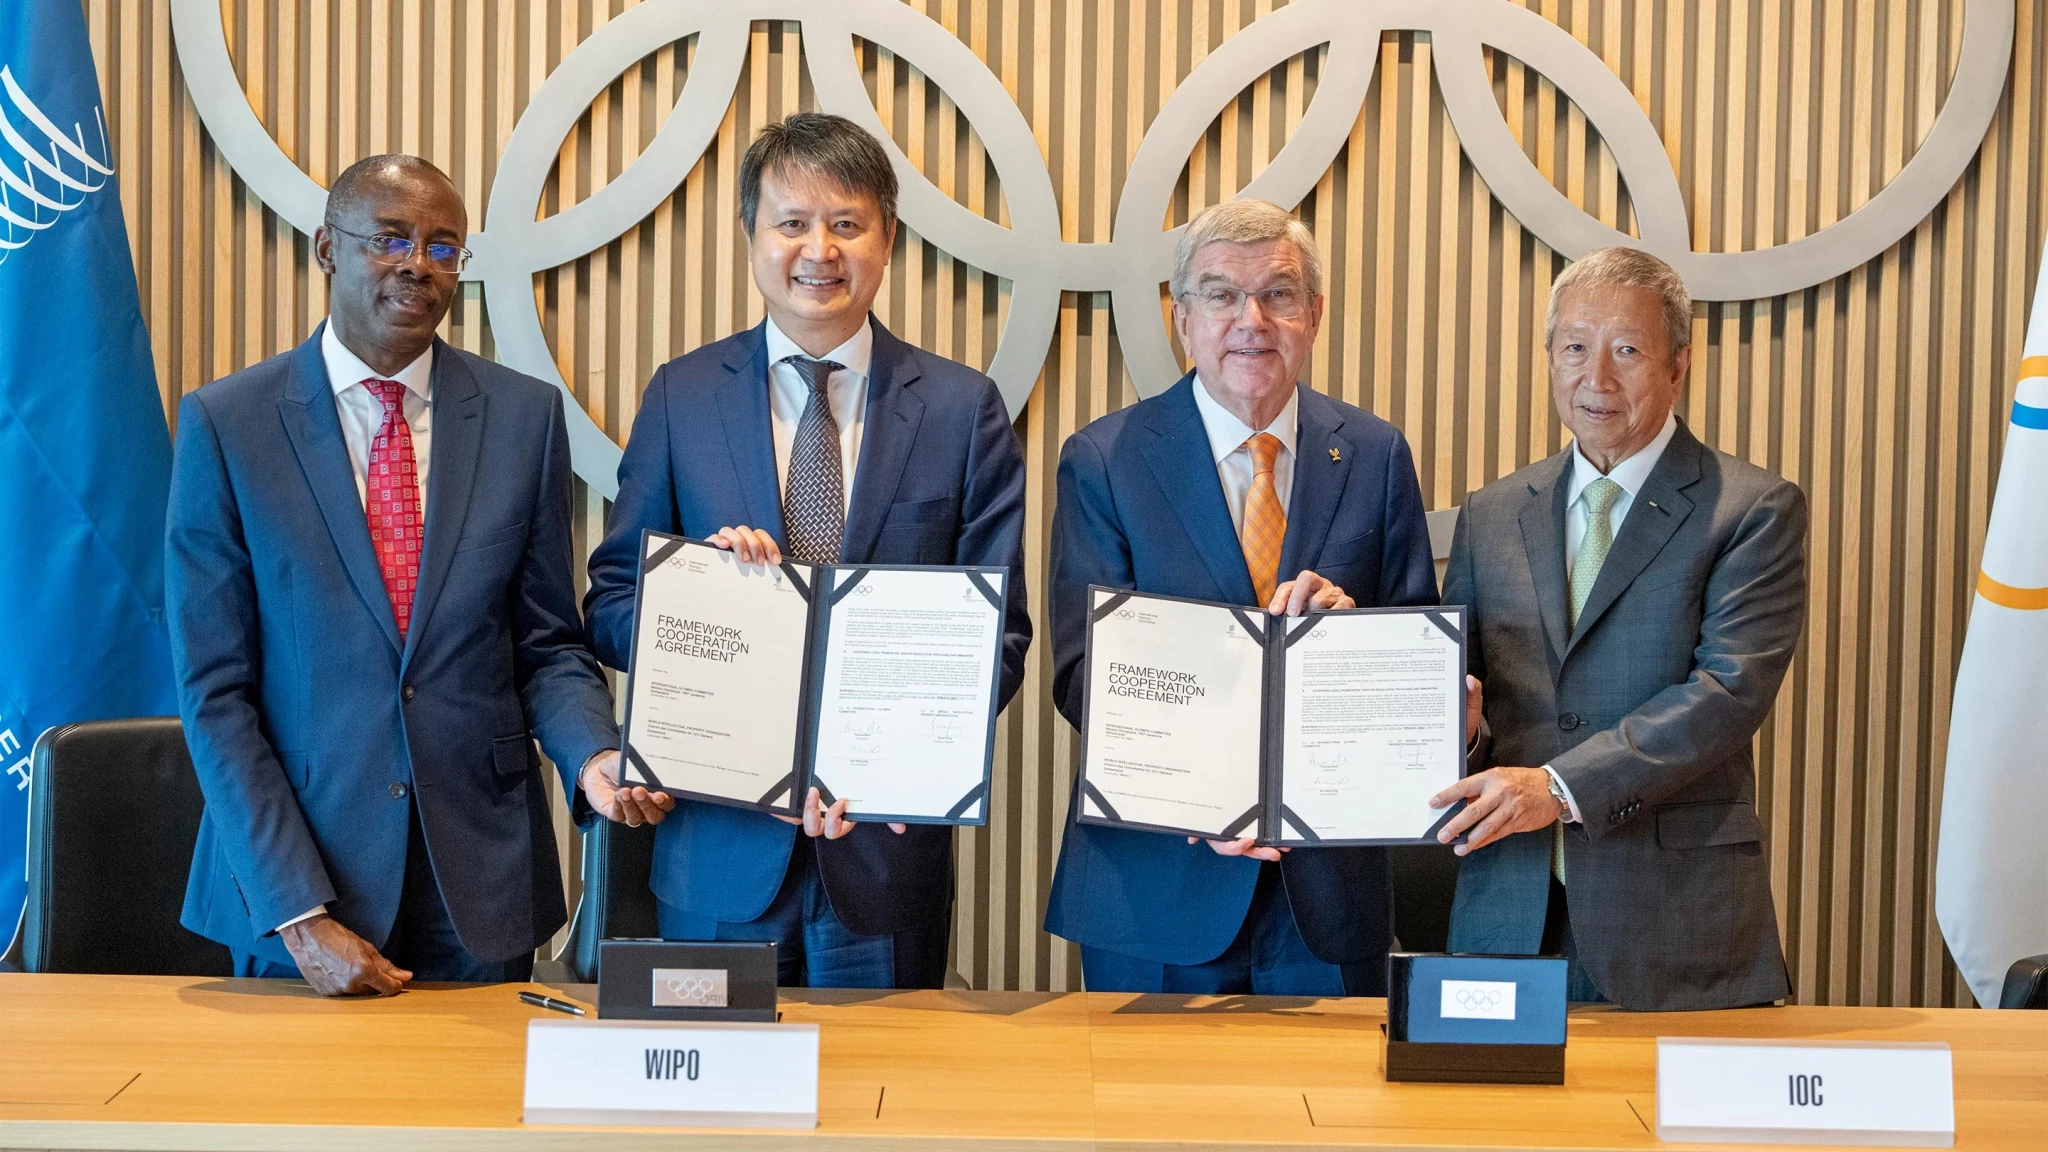 IOC partners with WIPO in intellectual property agreement